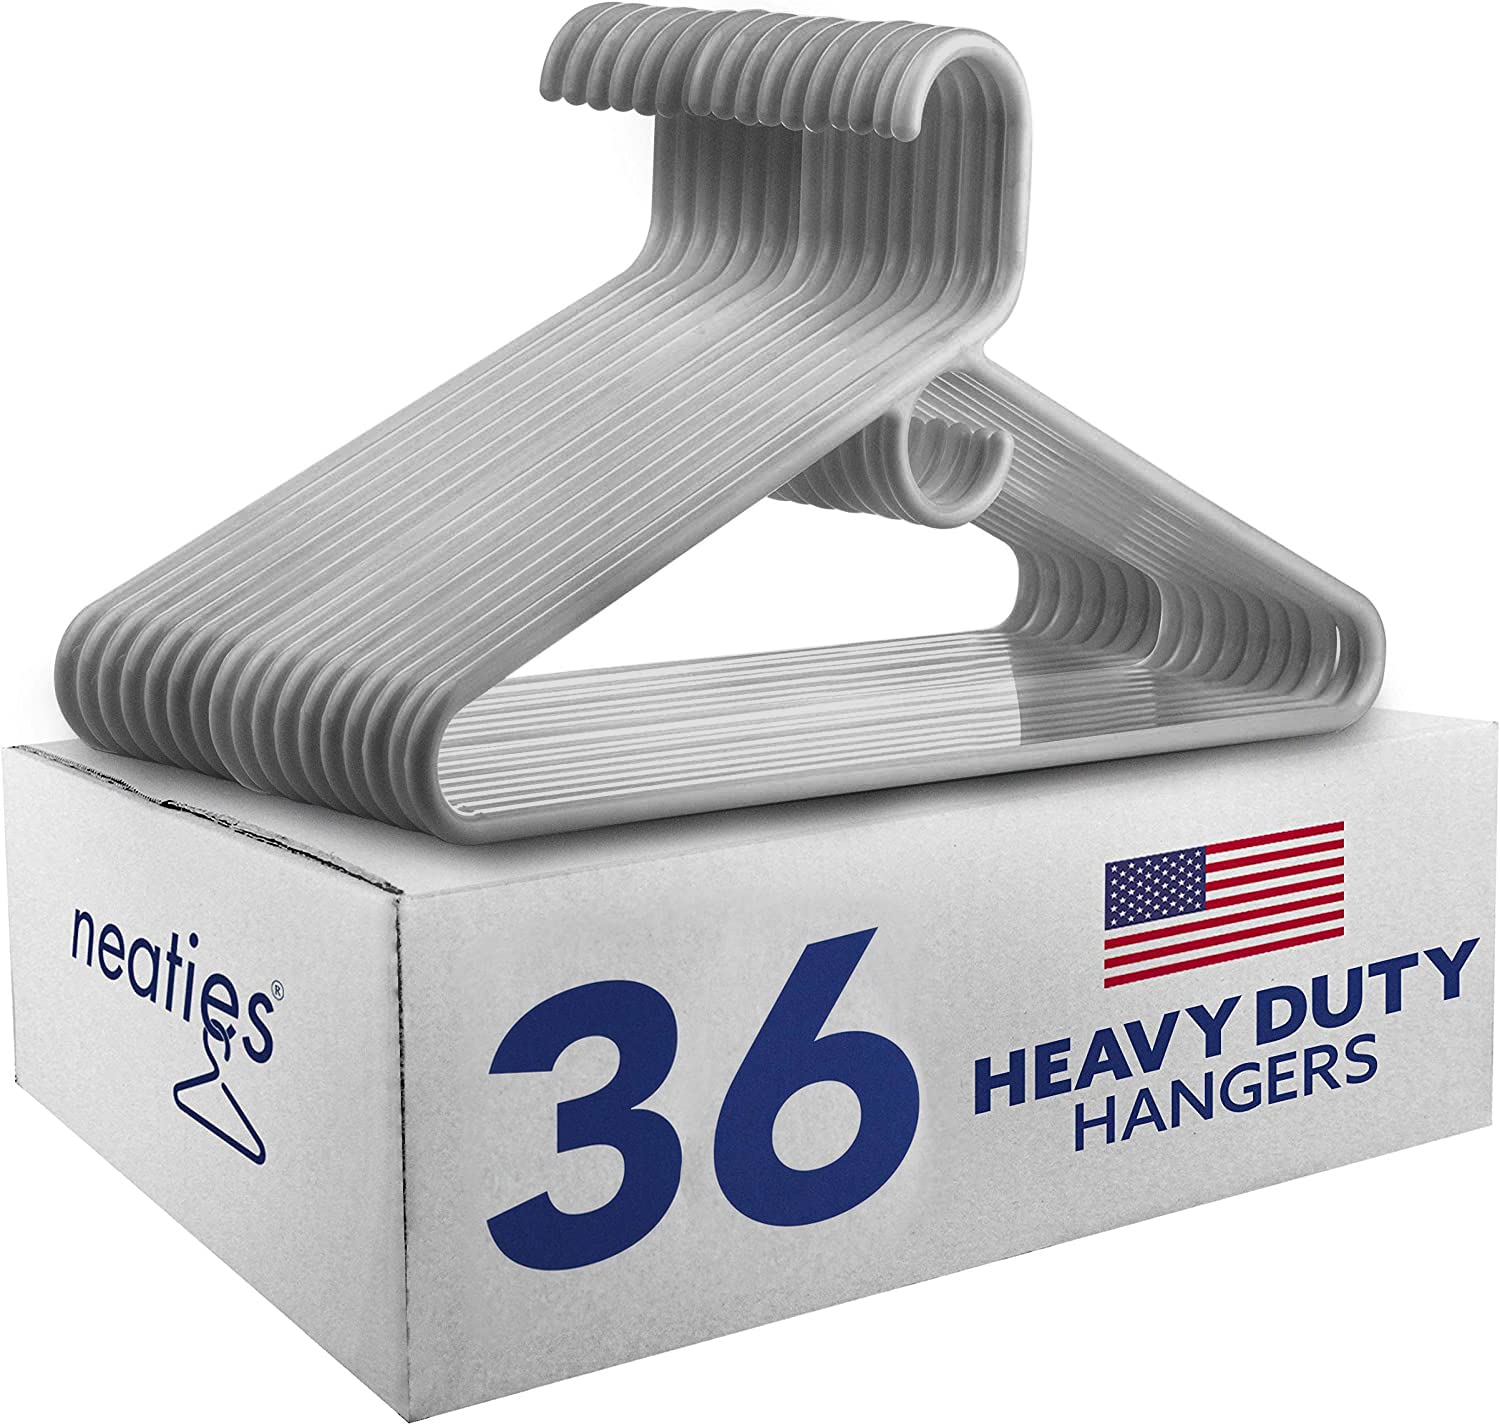  Neaties Heavy Duty Plastic Clothes Hangers, 36 Pack, Made in  USA, White : Home & Kitchen